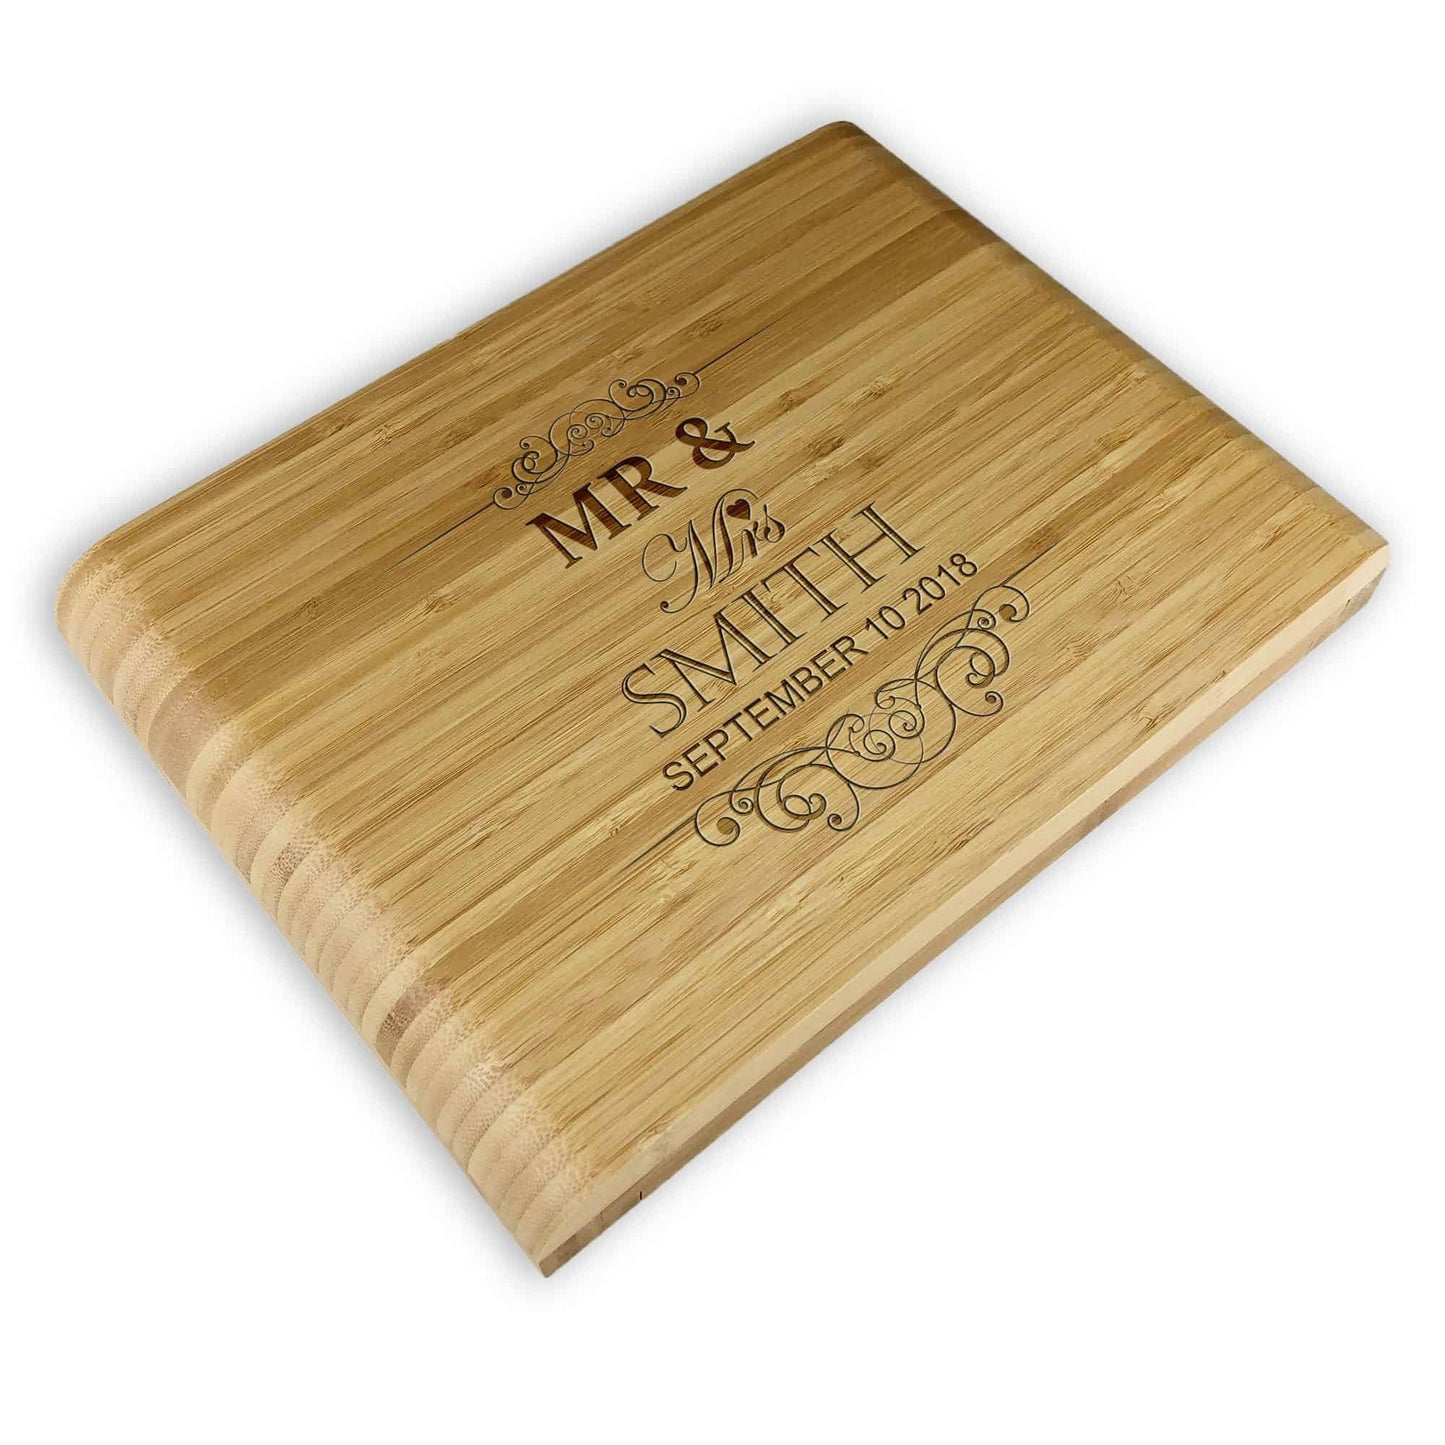 Mr & Mrs Cheese board with Knives